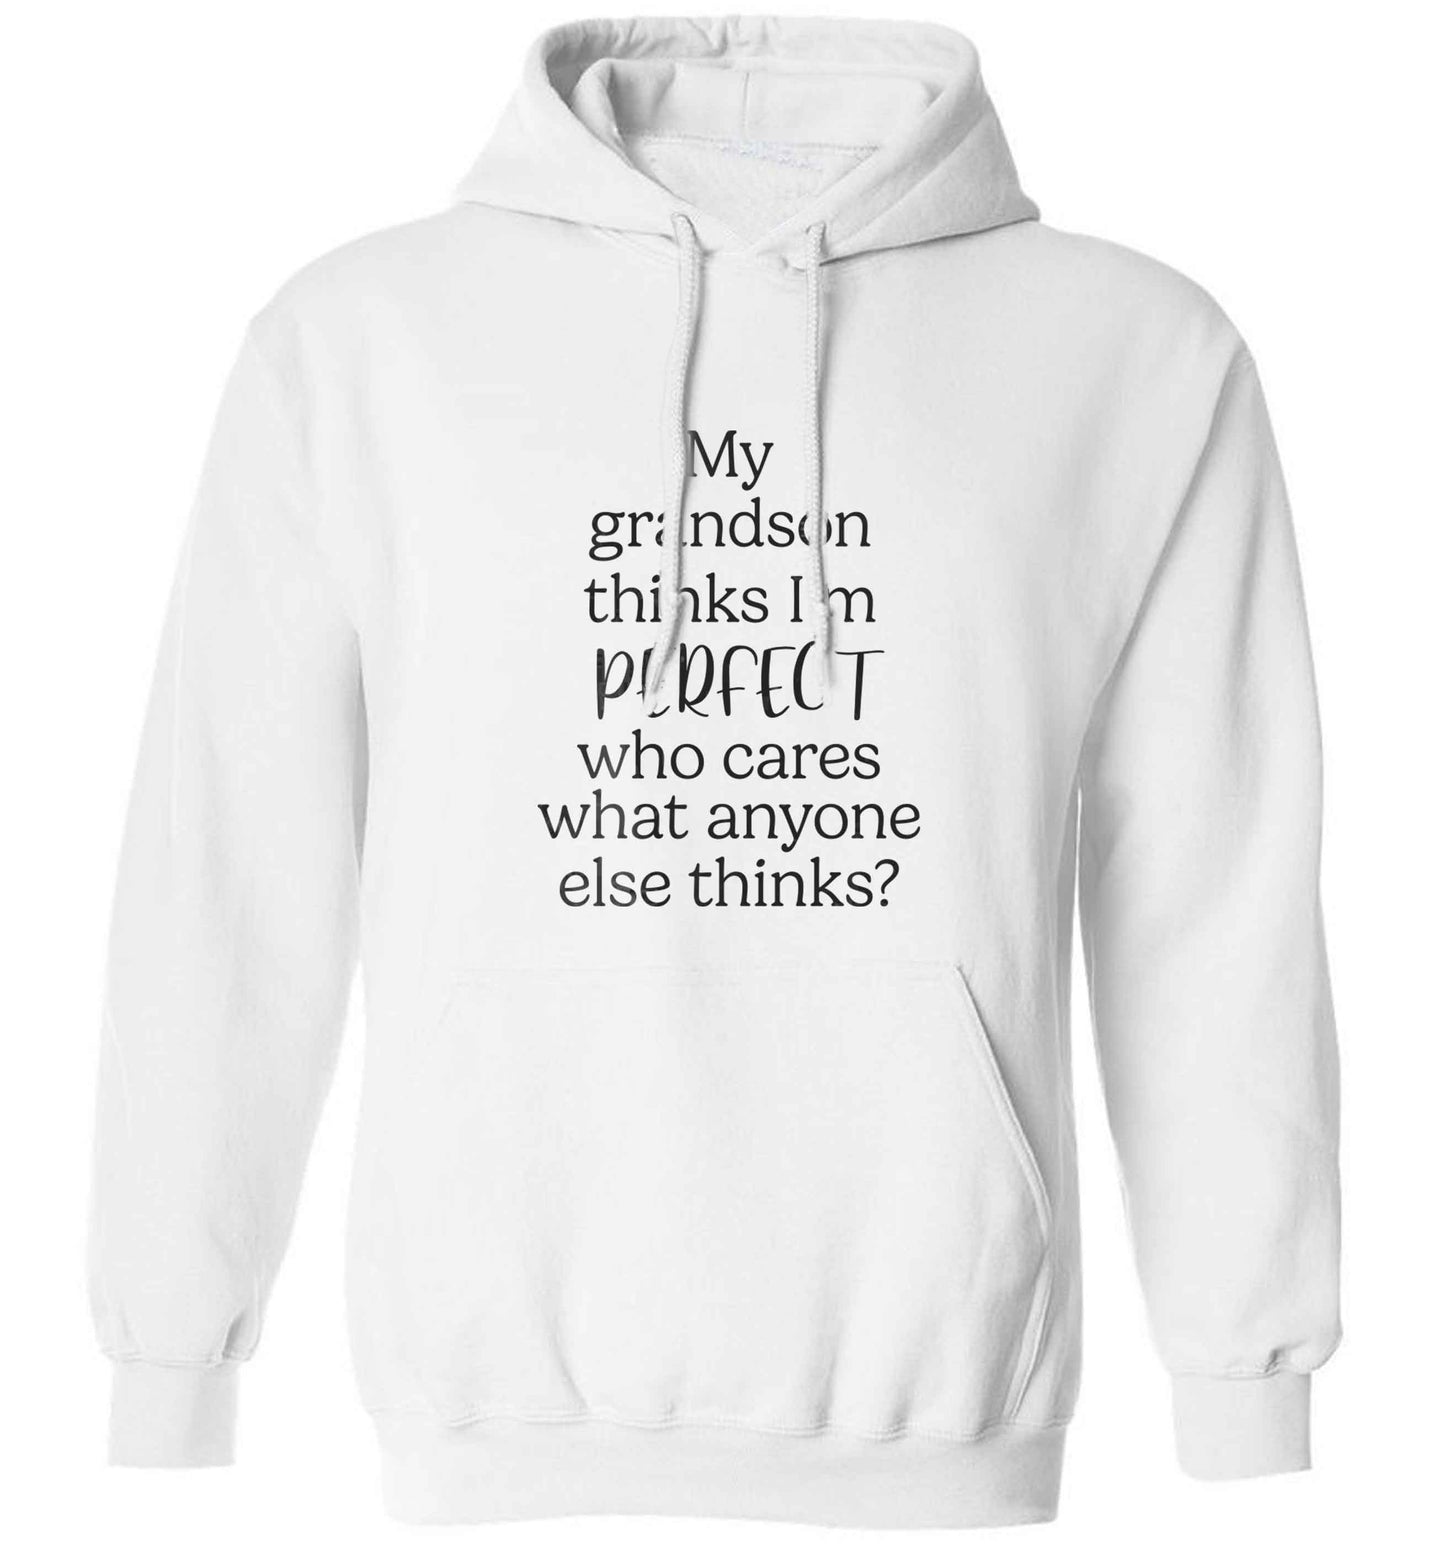 My grandson thinks I'm perfect adults unisex white hoodie 2XL